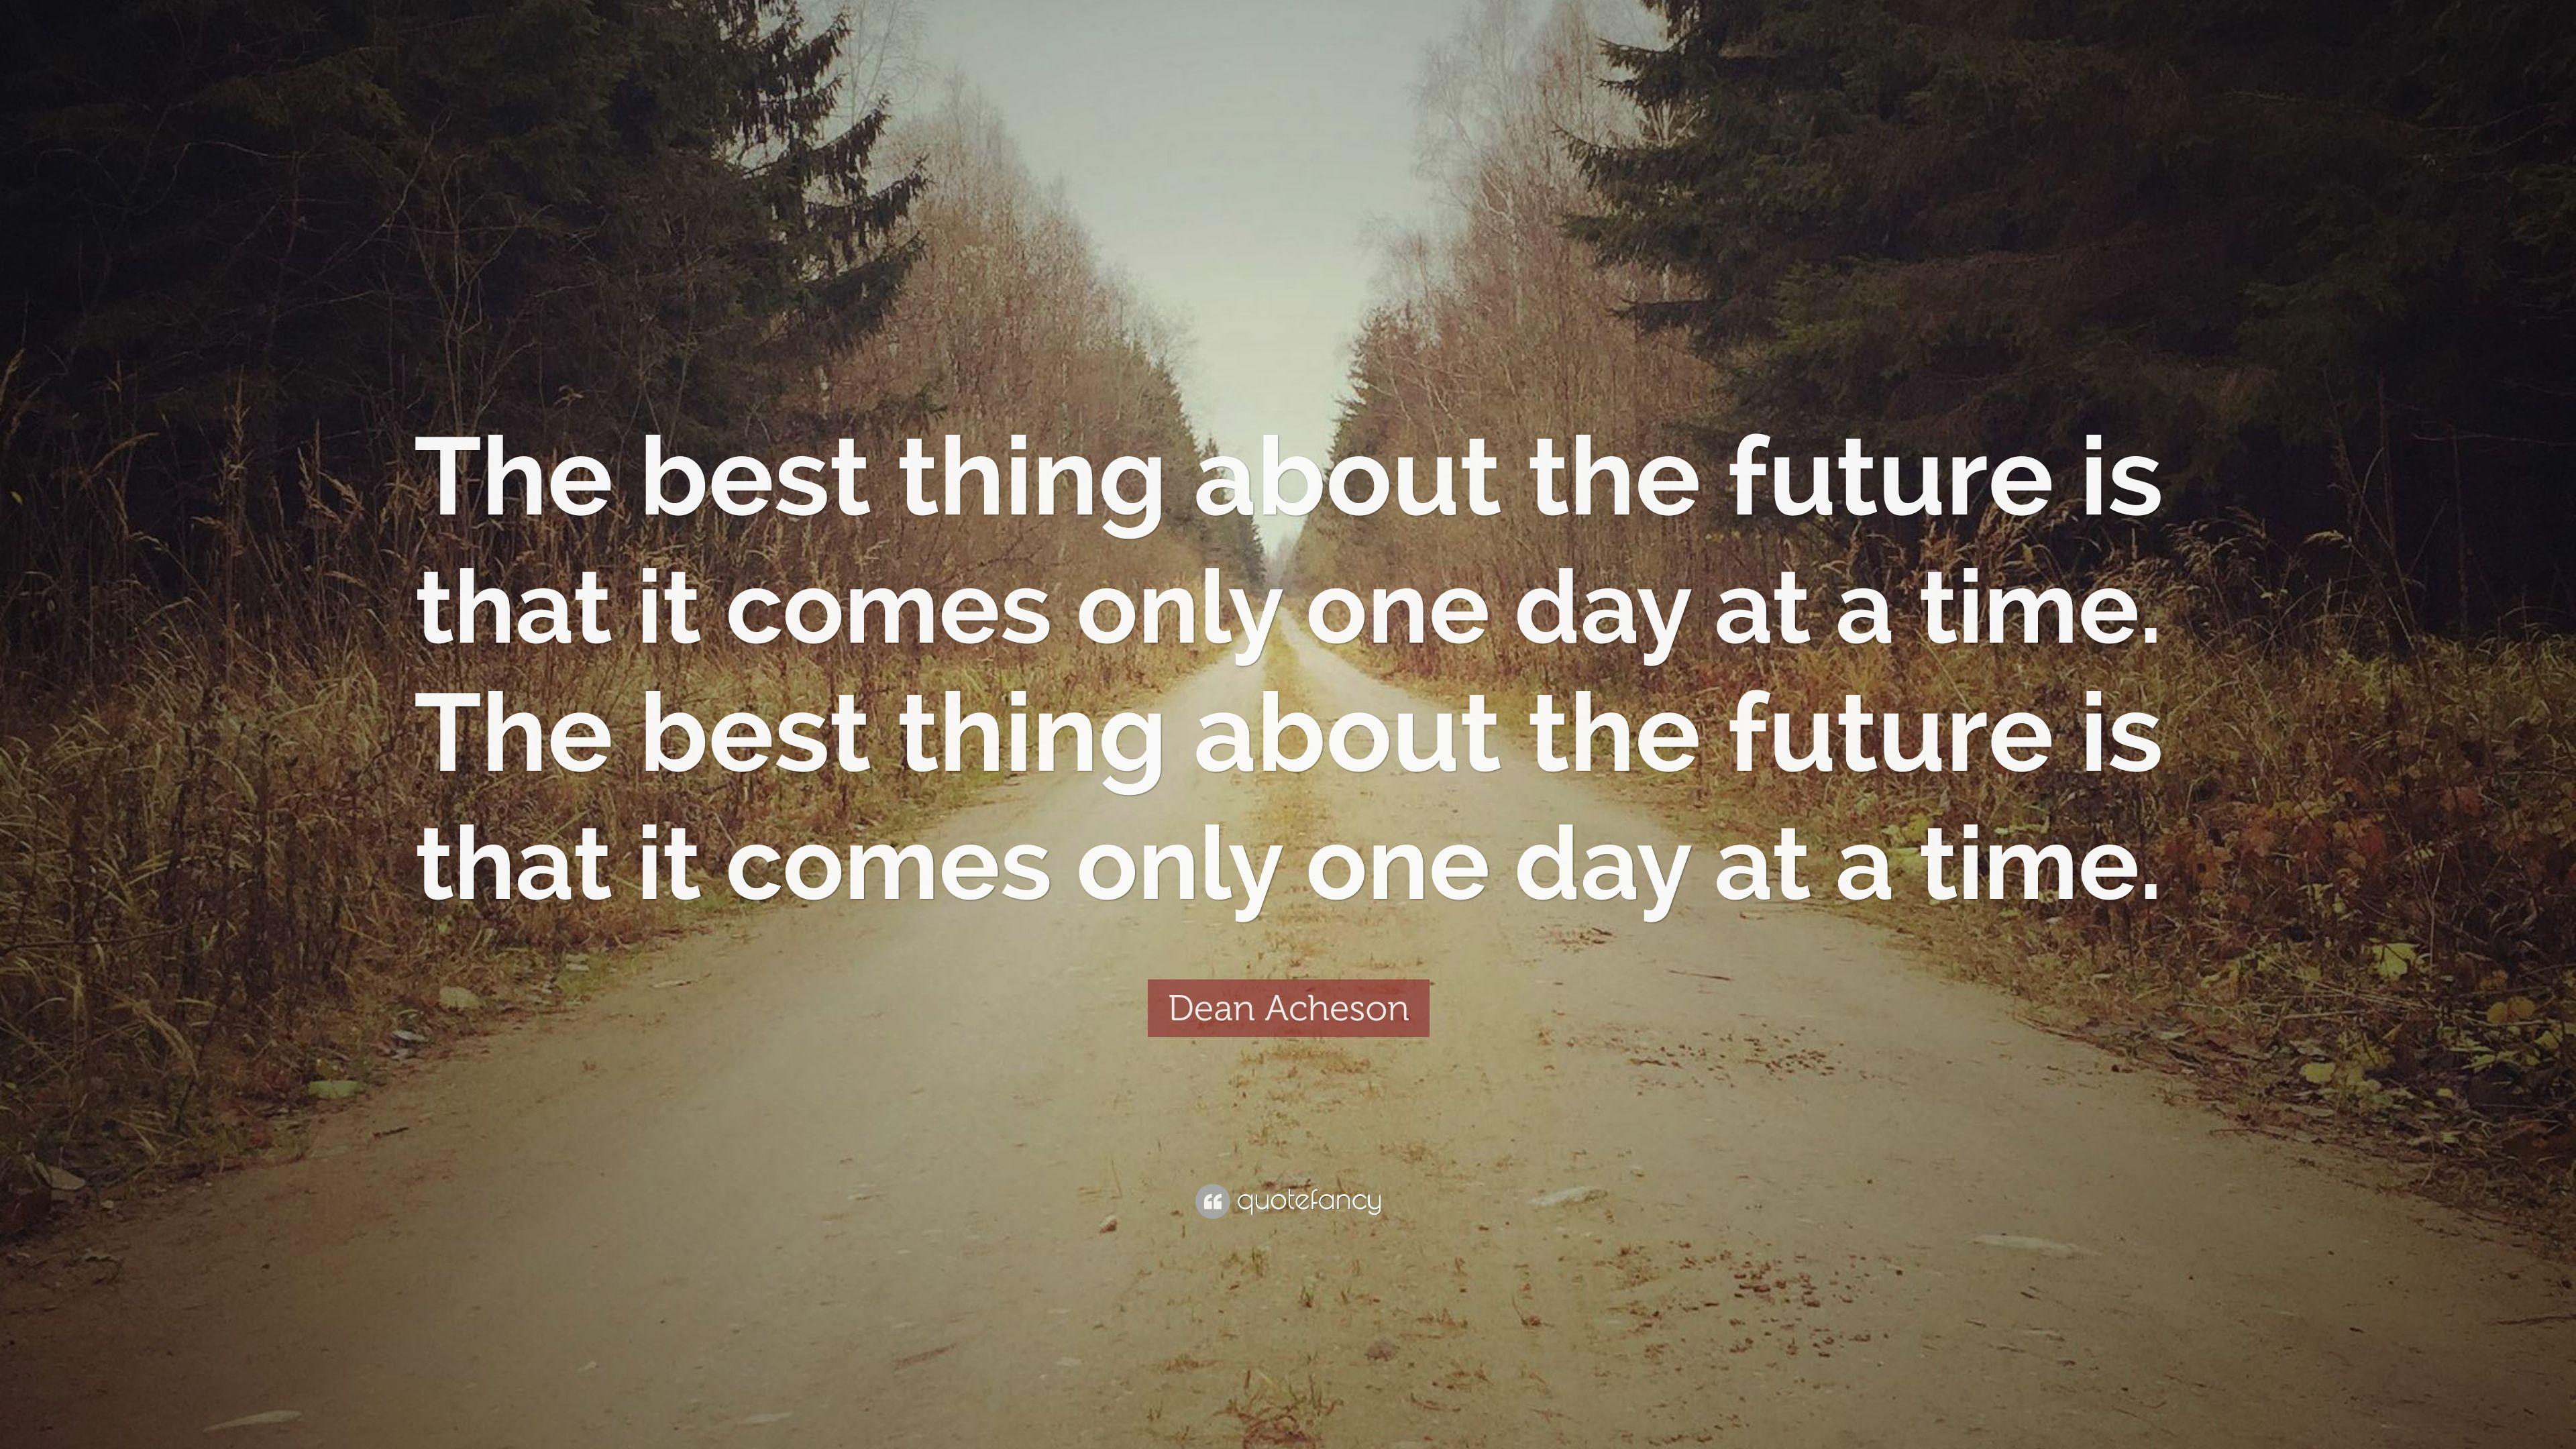 Dean Acheson Quote: “The best thing about the future is that it